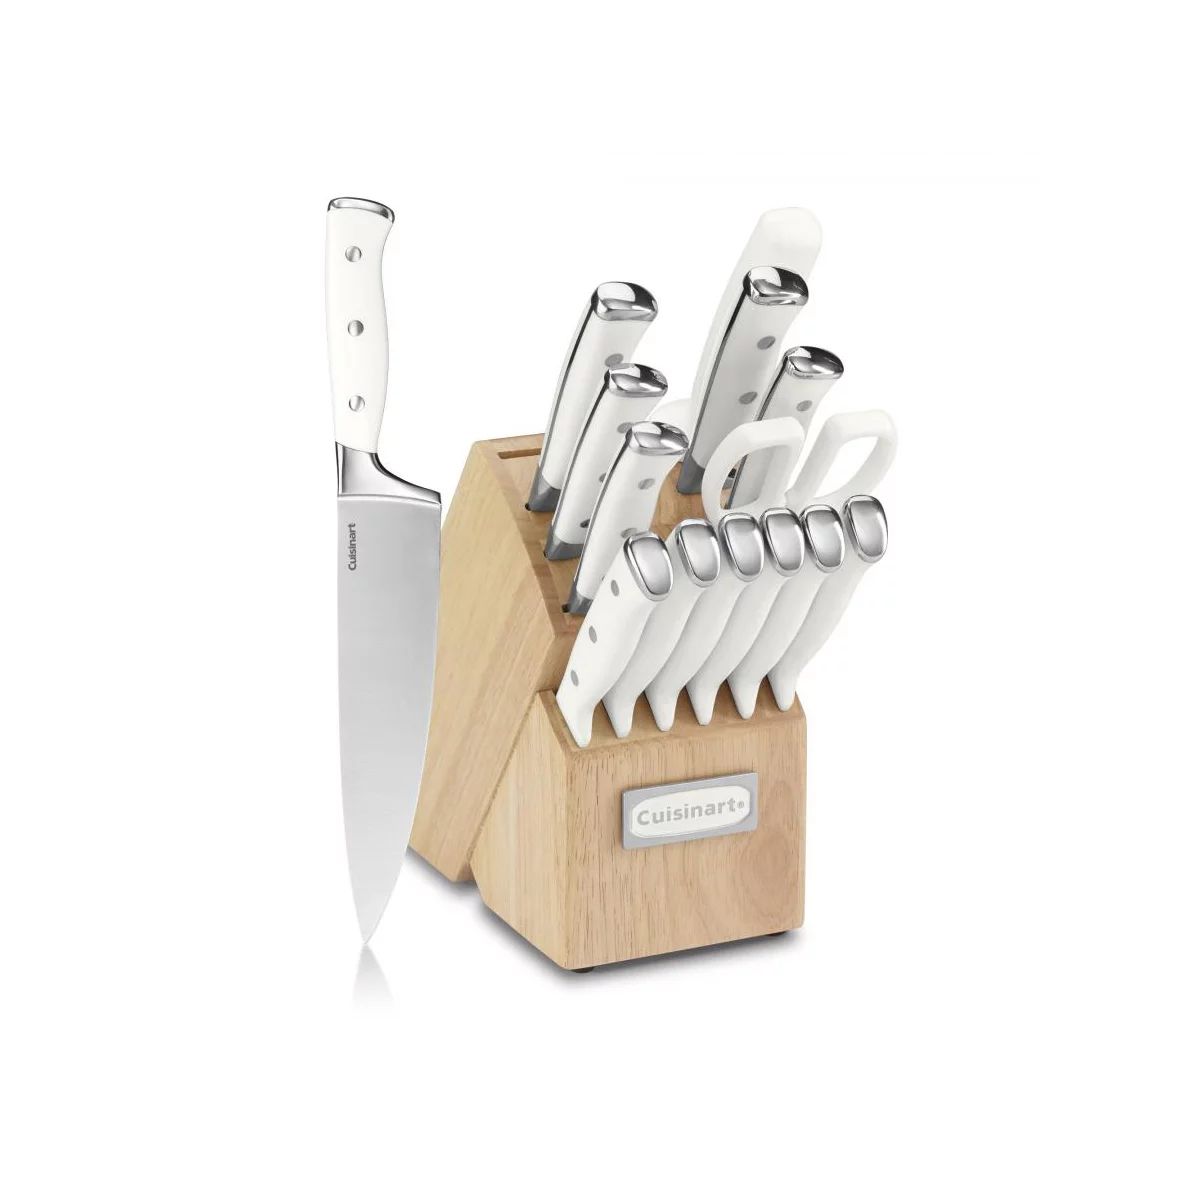 Cuisinart Classic Forged Triple Rivet 15-Piece Cutlery Set with Block, White and Stainless | Walmart (US)